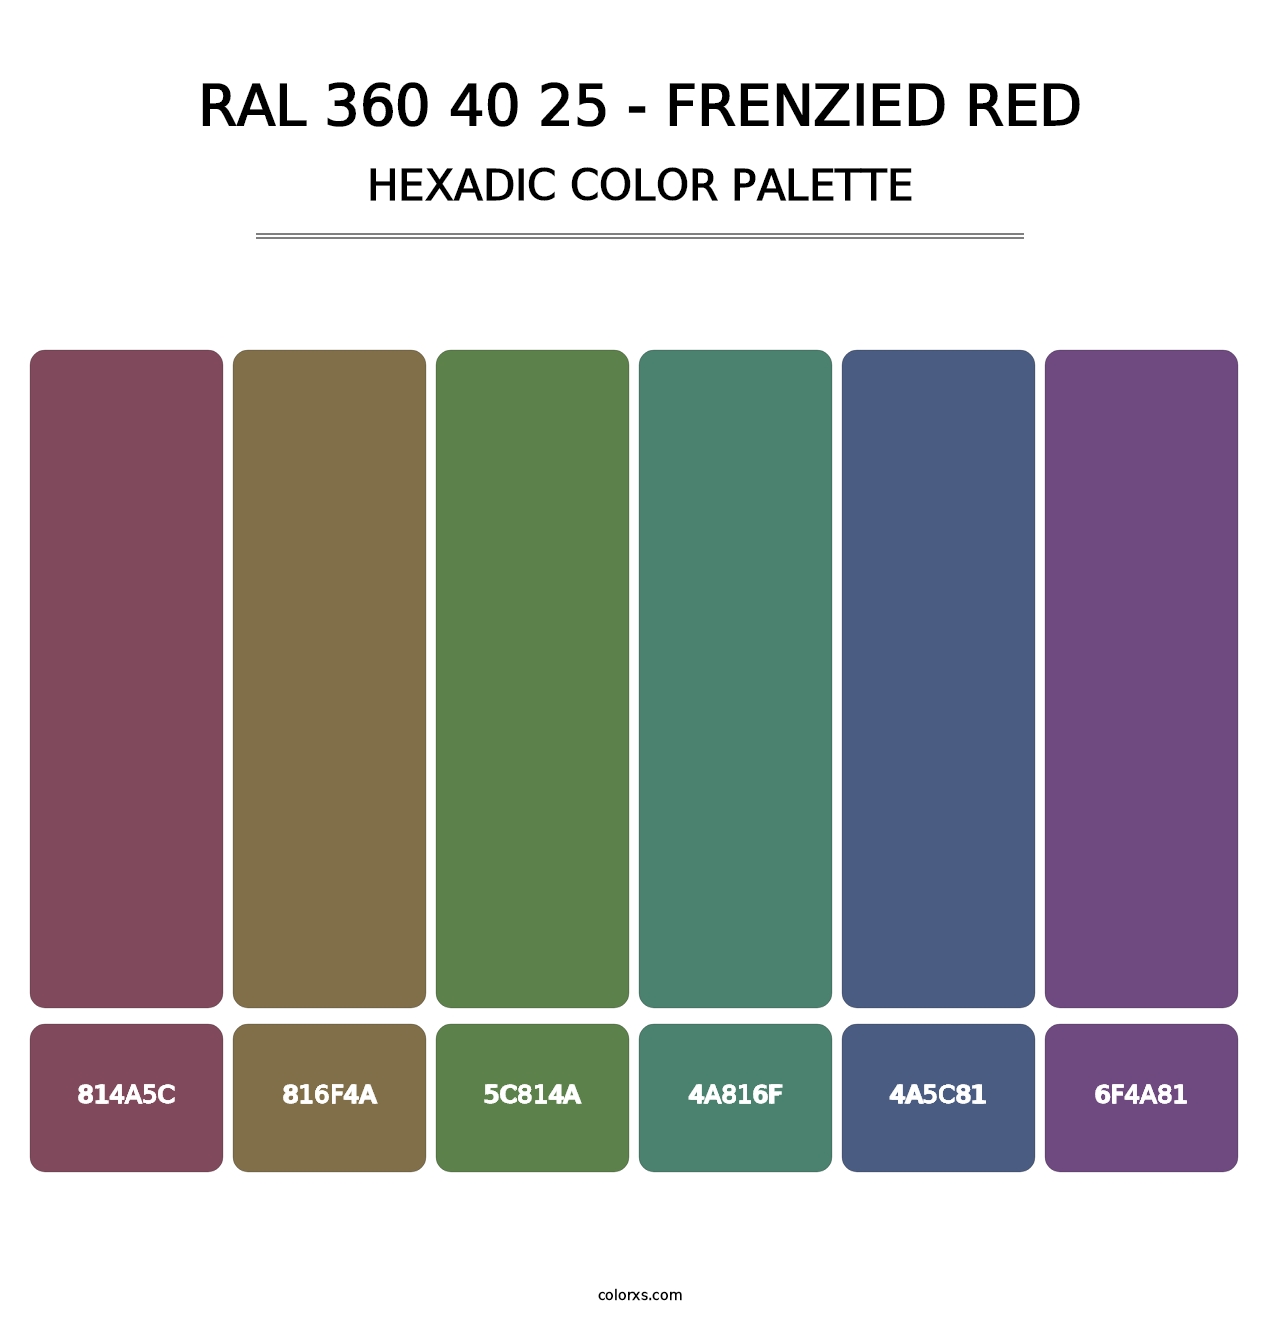 RAL 360 40 25 - Frenzied Red - Hexadic Color Palette